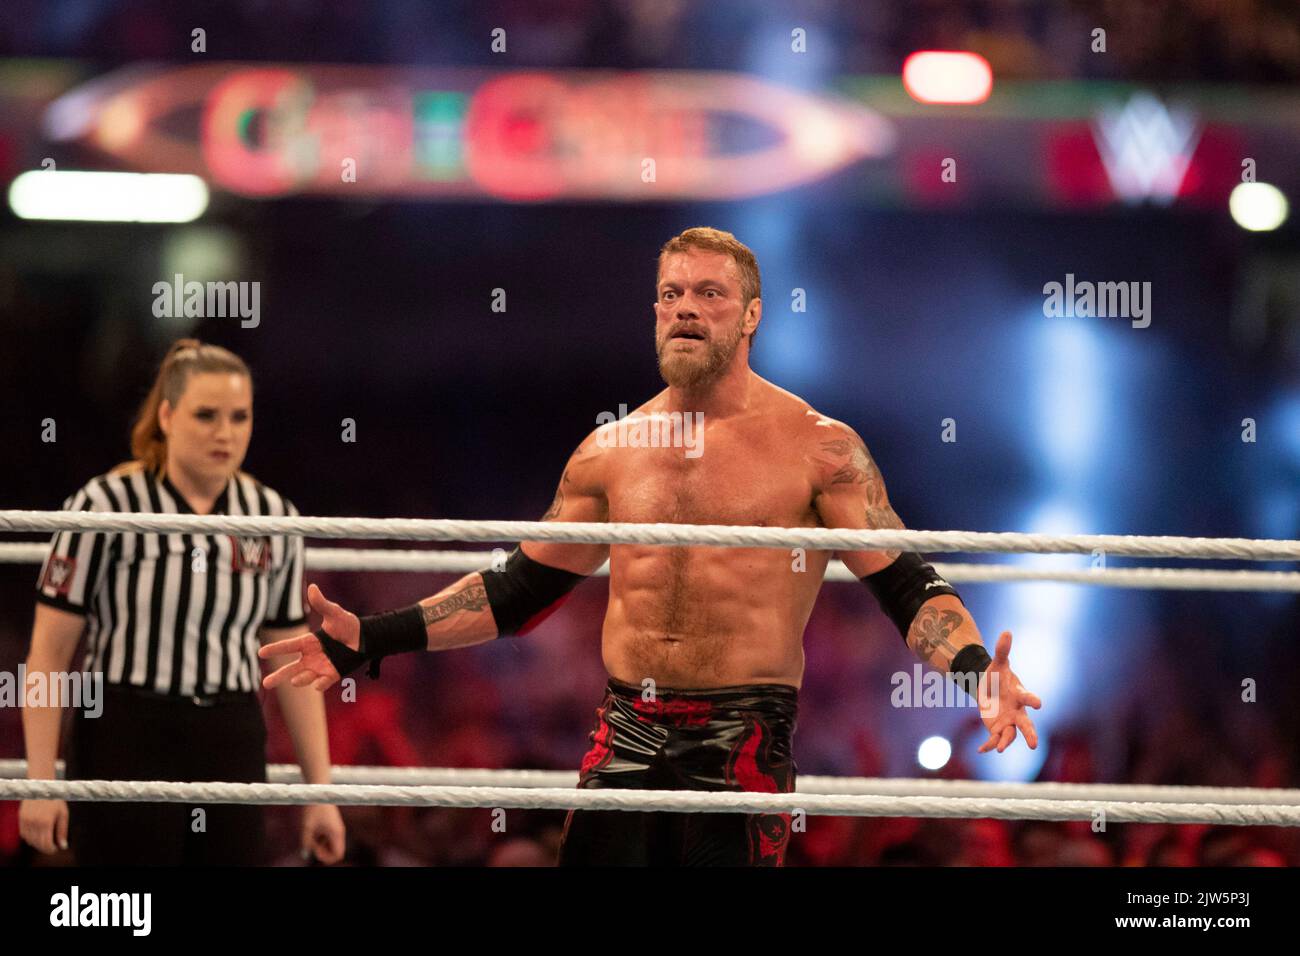 Cardiff, Wales, UK. 3rd Sep, 2022. Edge & Rey Mysterio vs. Finn Bálor & Damian Priest during the WWE ‘Clash At The Castle' wrestling event at the Principality Stadium in Cardiff. Credit: Mark Hawkins/Alamy Live News Stock Photo